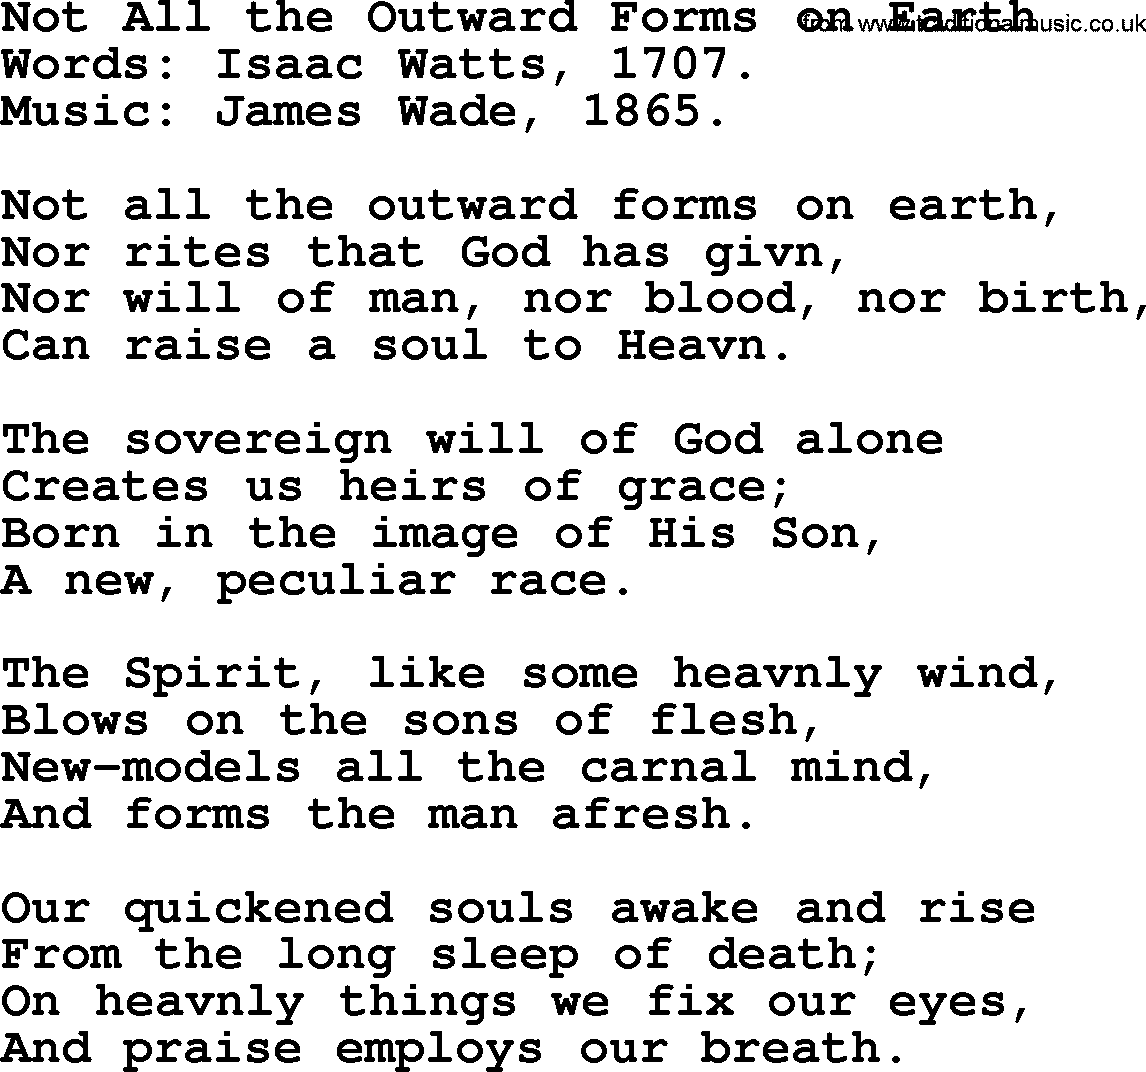 Isaac Watts Christian hymn: Not All the Outward Forms on Earth- lyricss